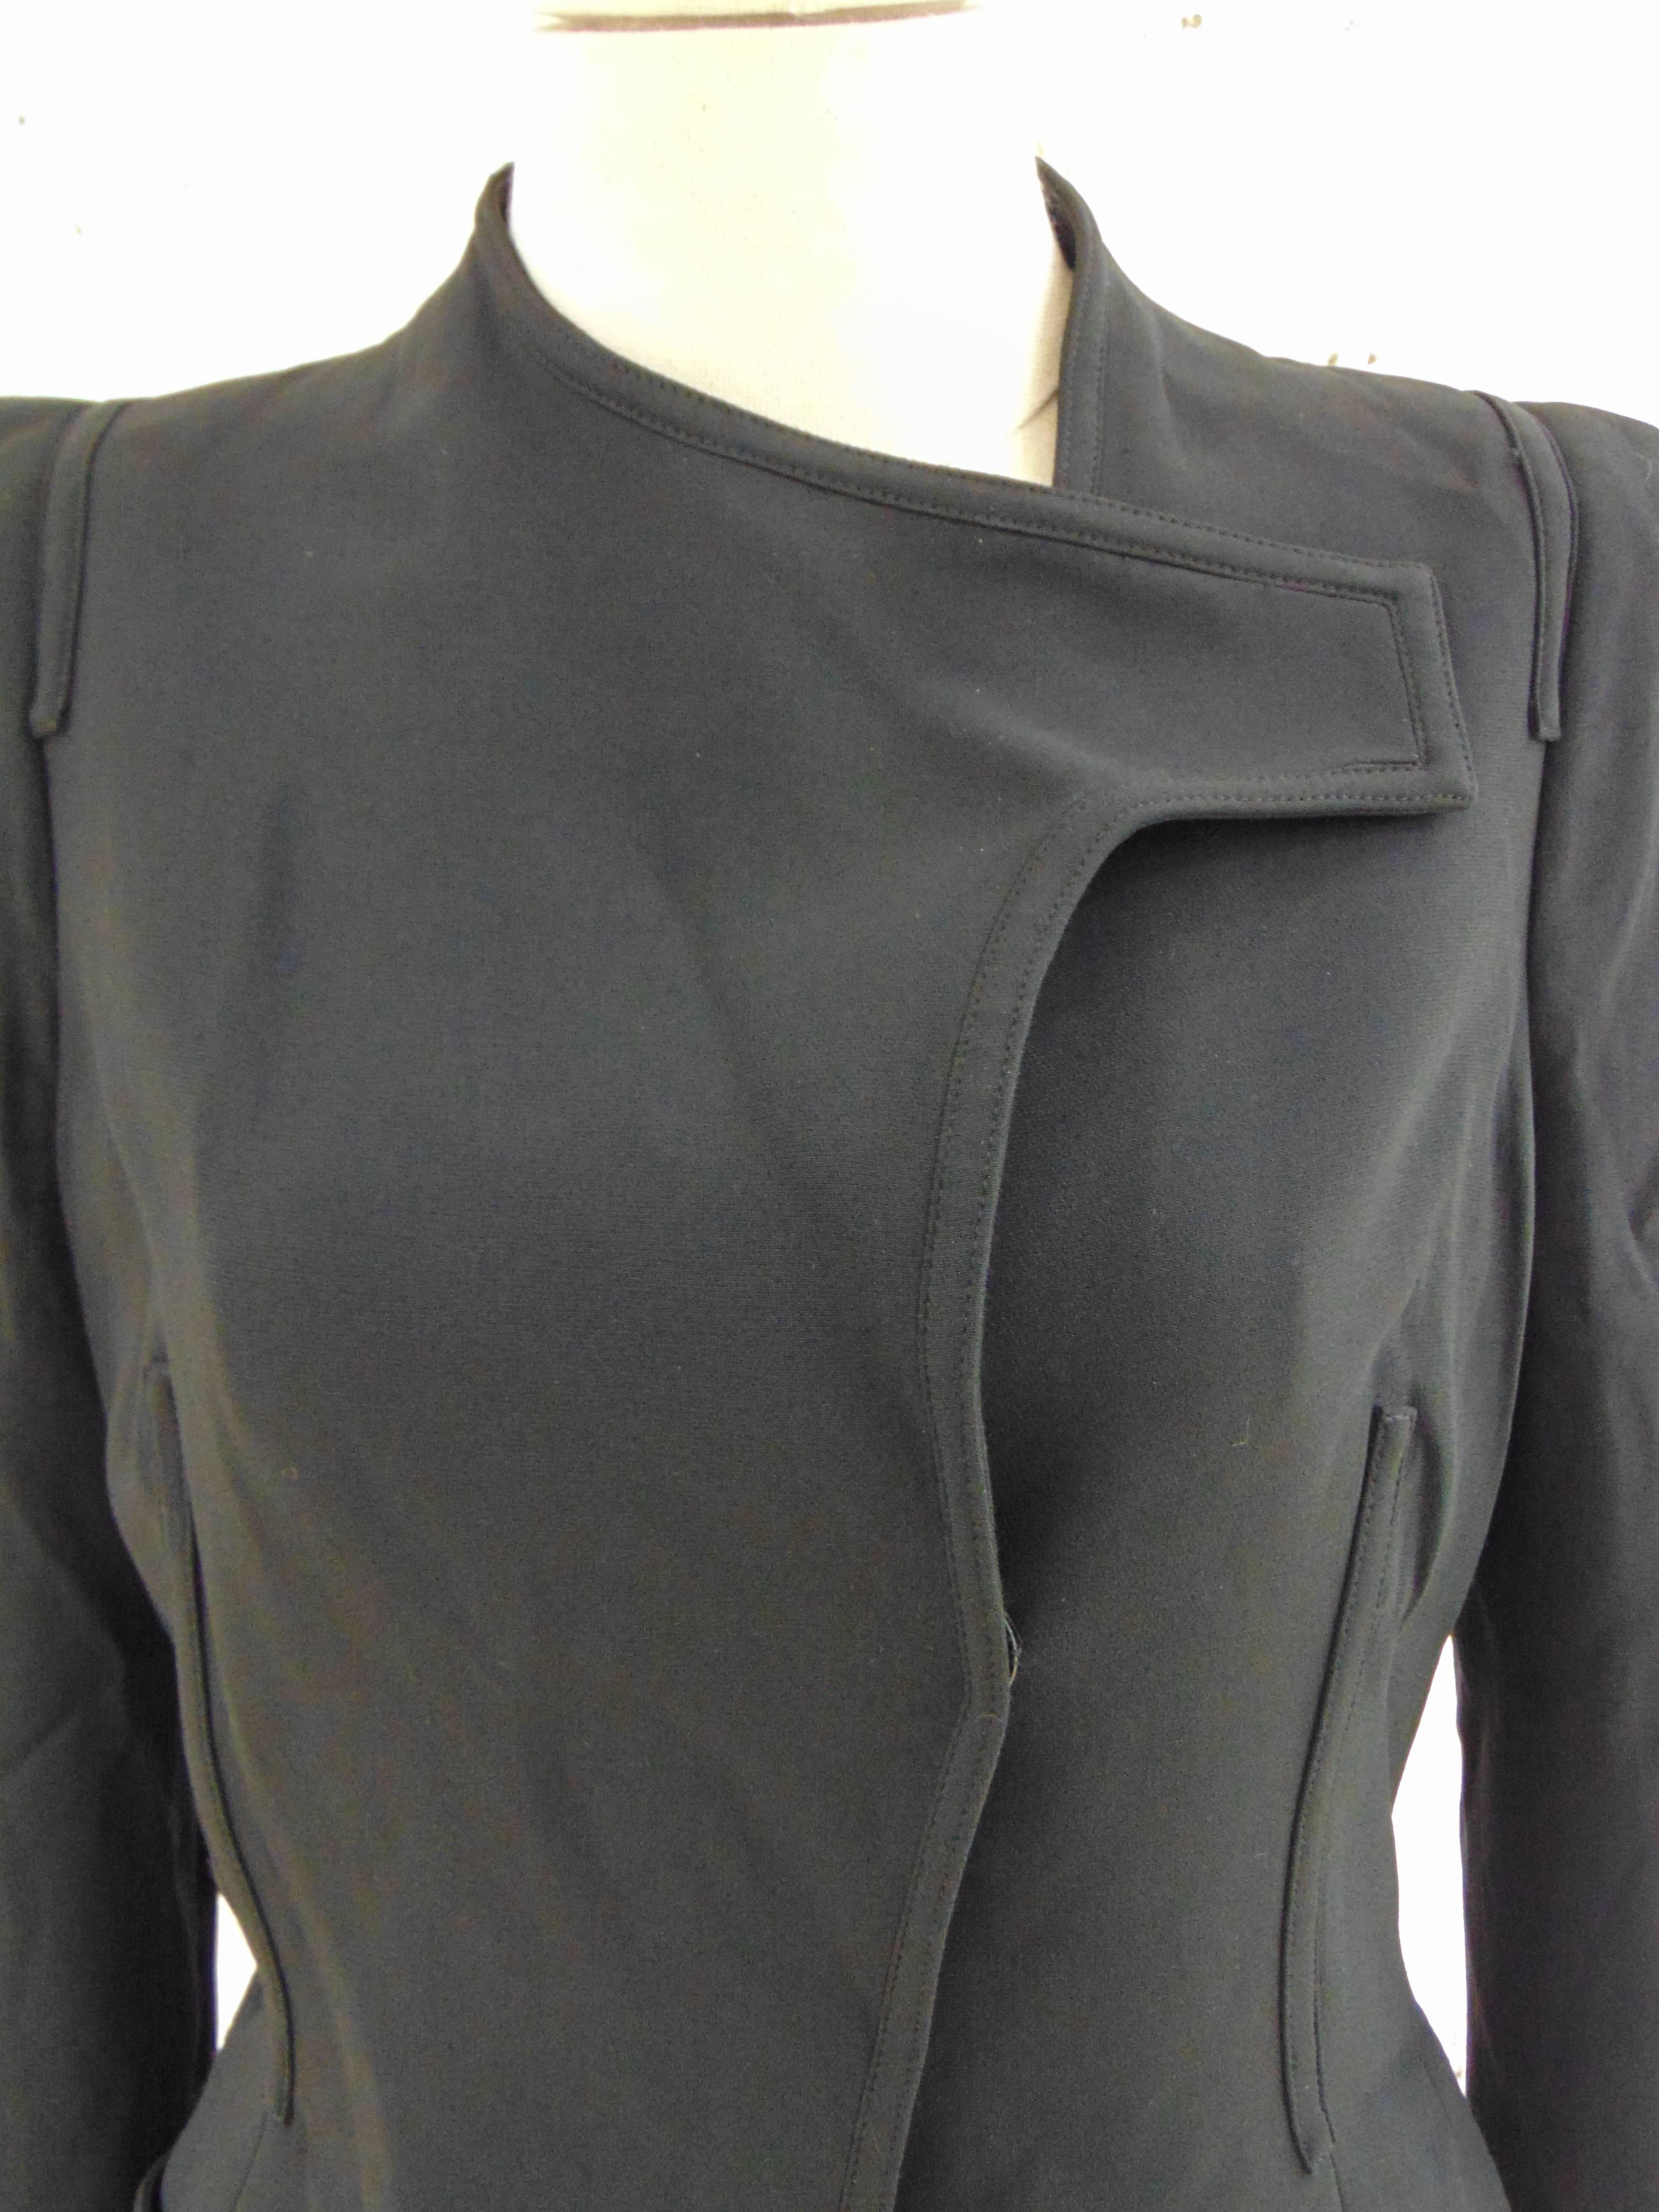 Tom Ford black cotton jacket
totally made in italy in size 44